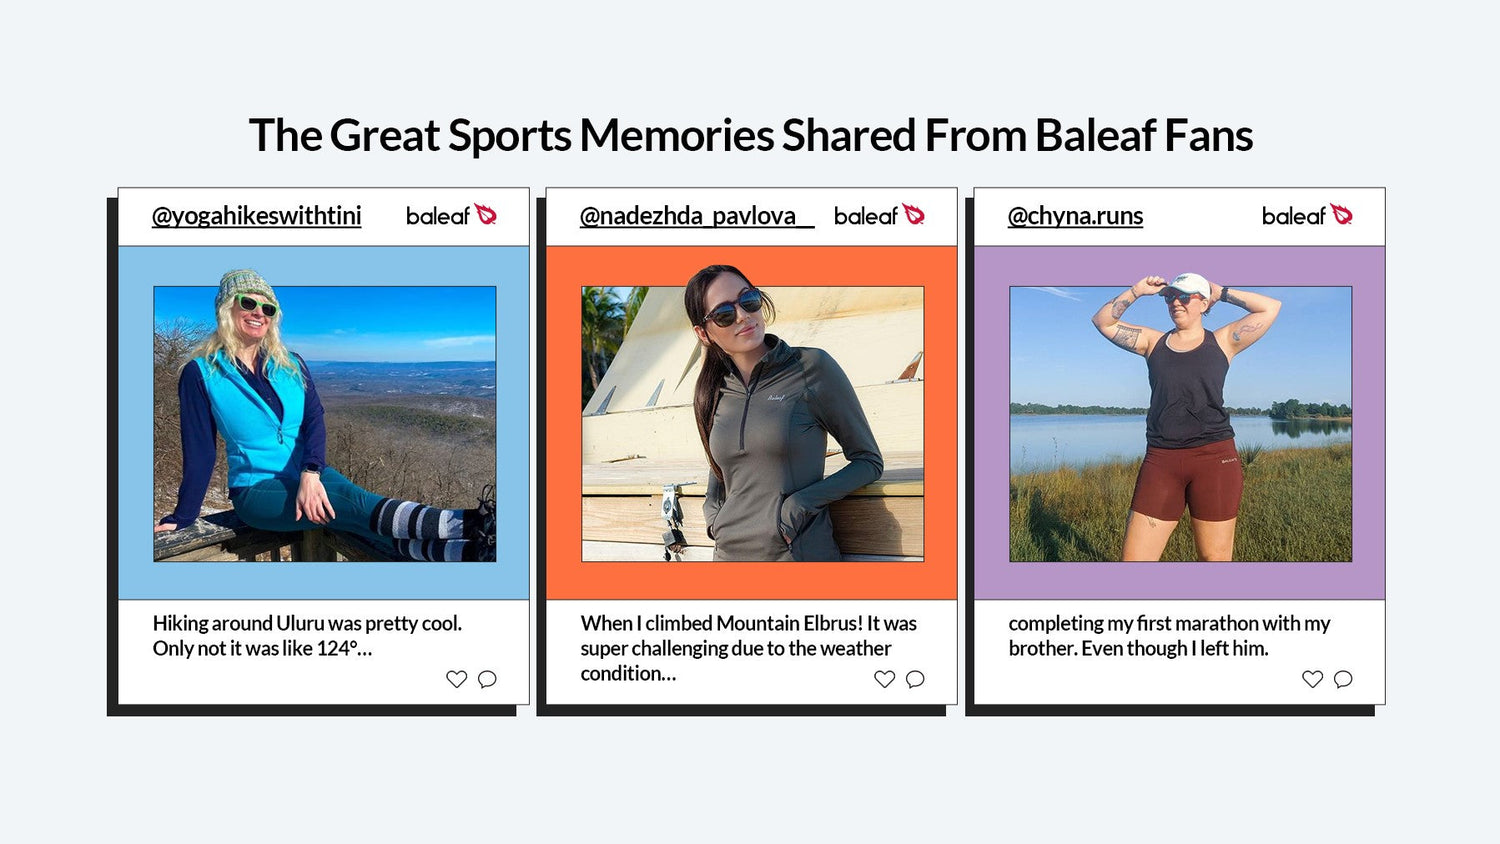 The Great Sports Memories Shared from Baleaf Fans